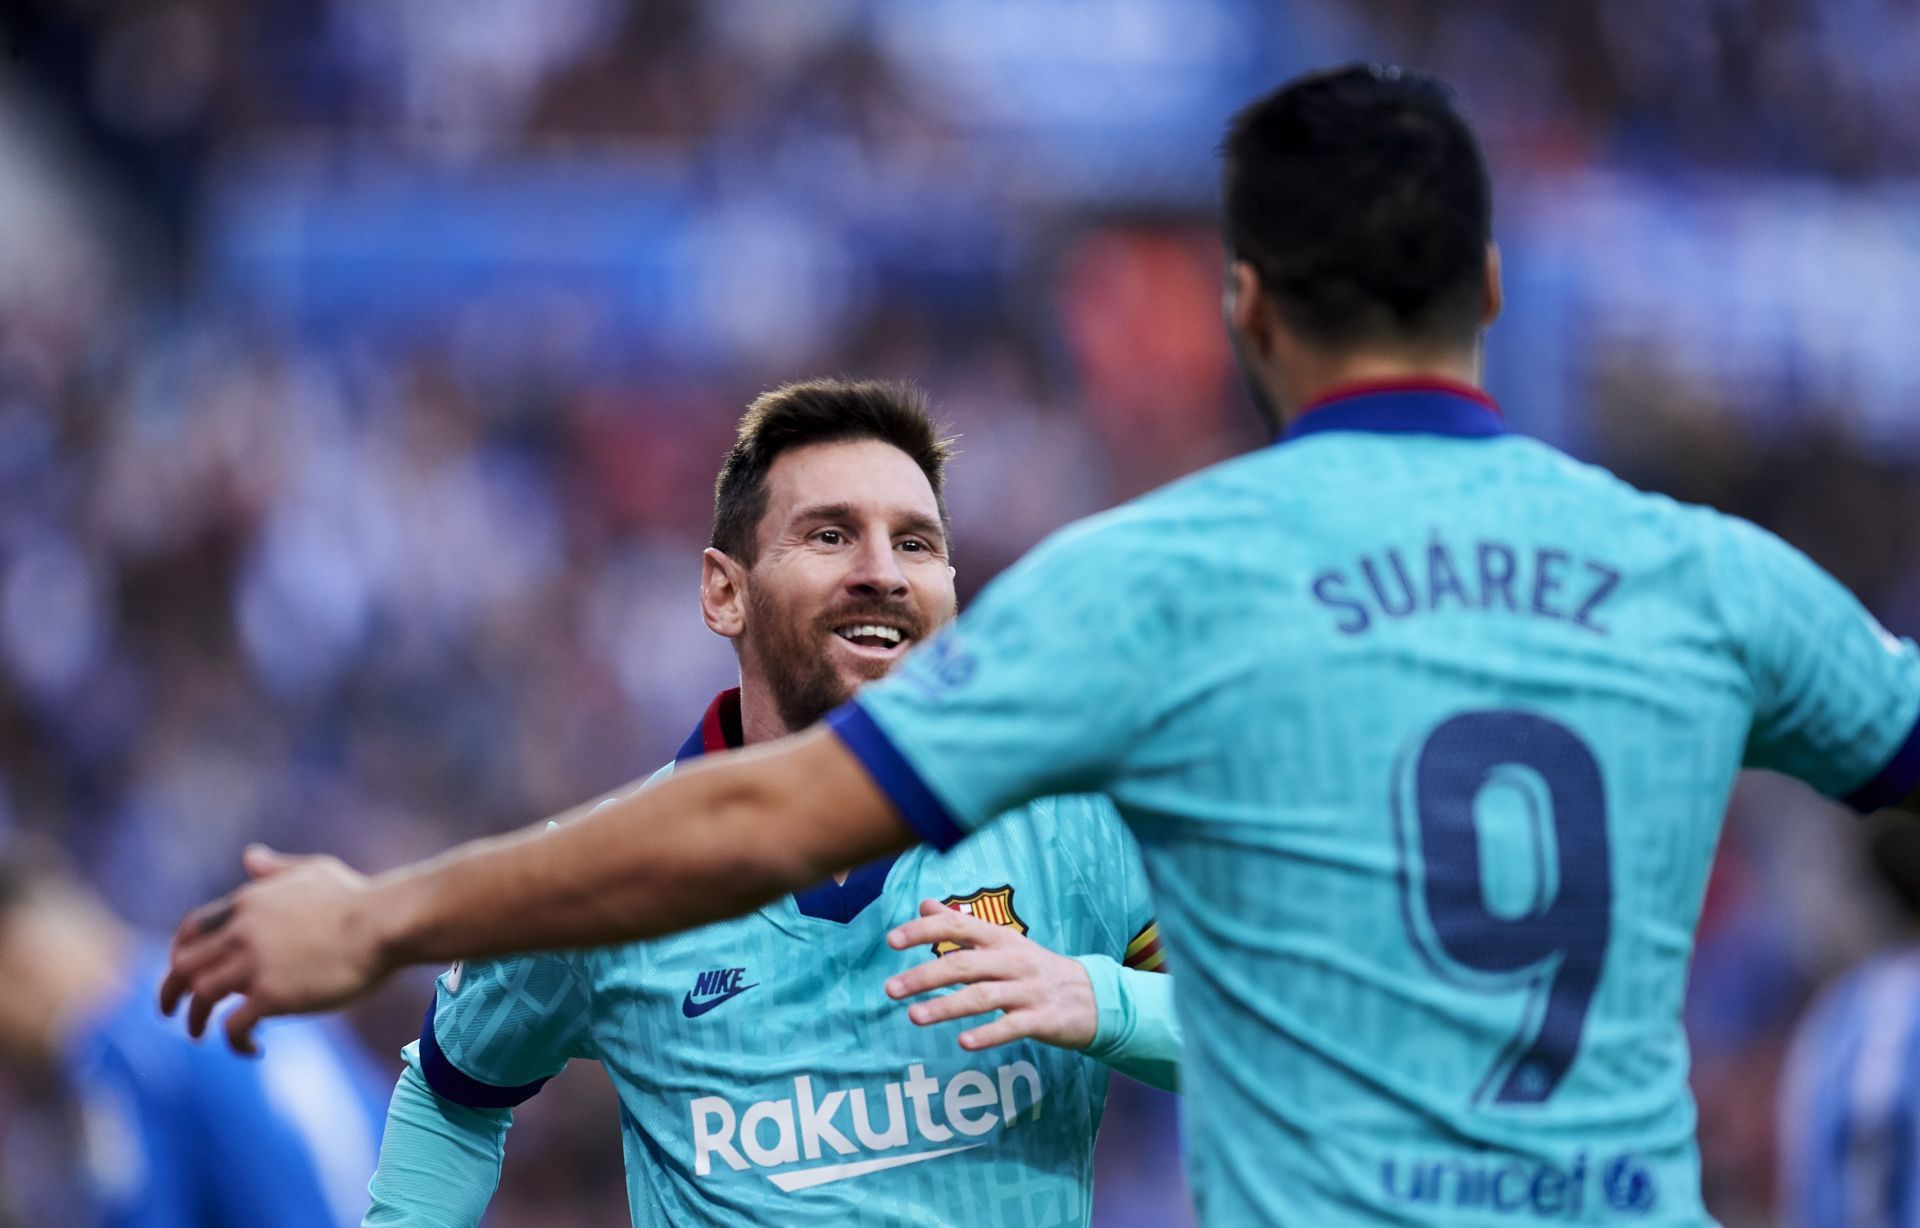 Lionel Messi became good friends with Luis Suarez at Barcelona.